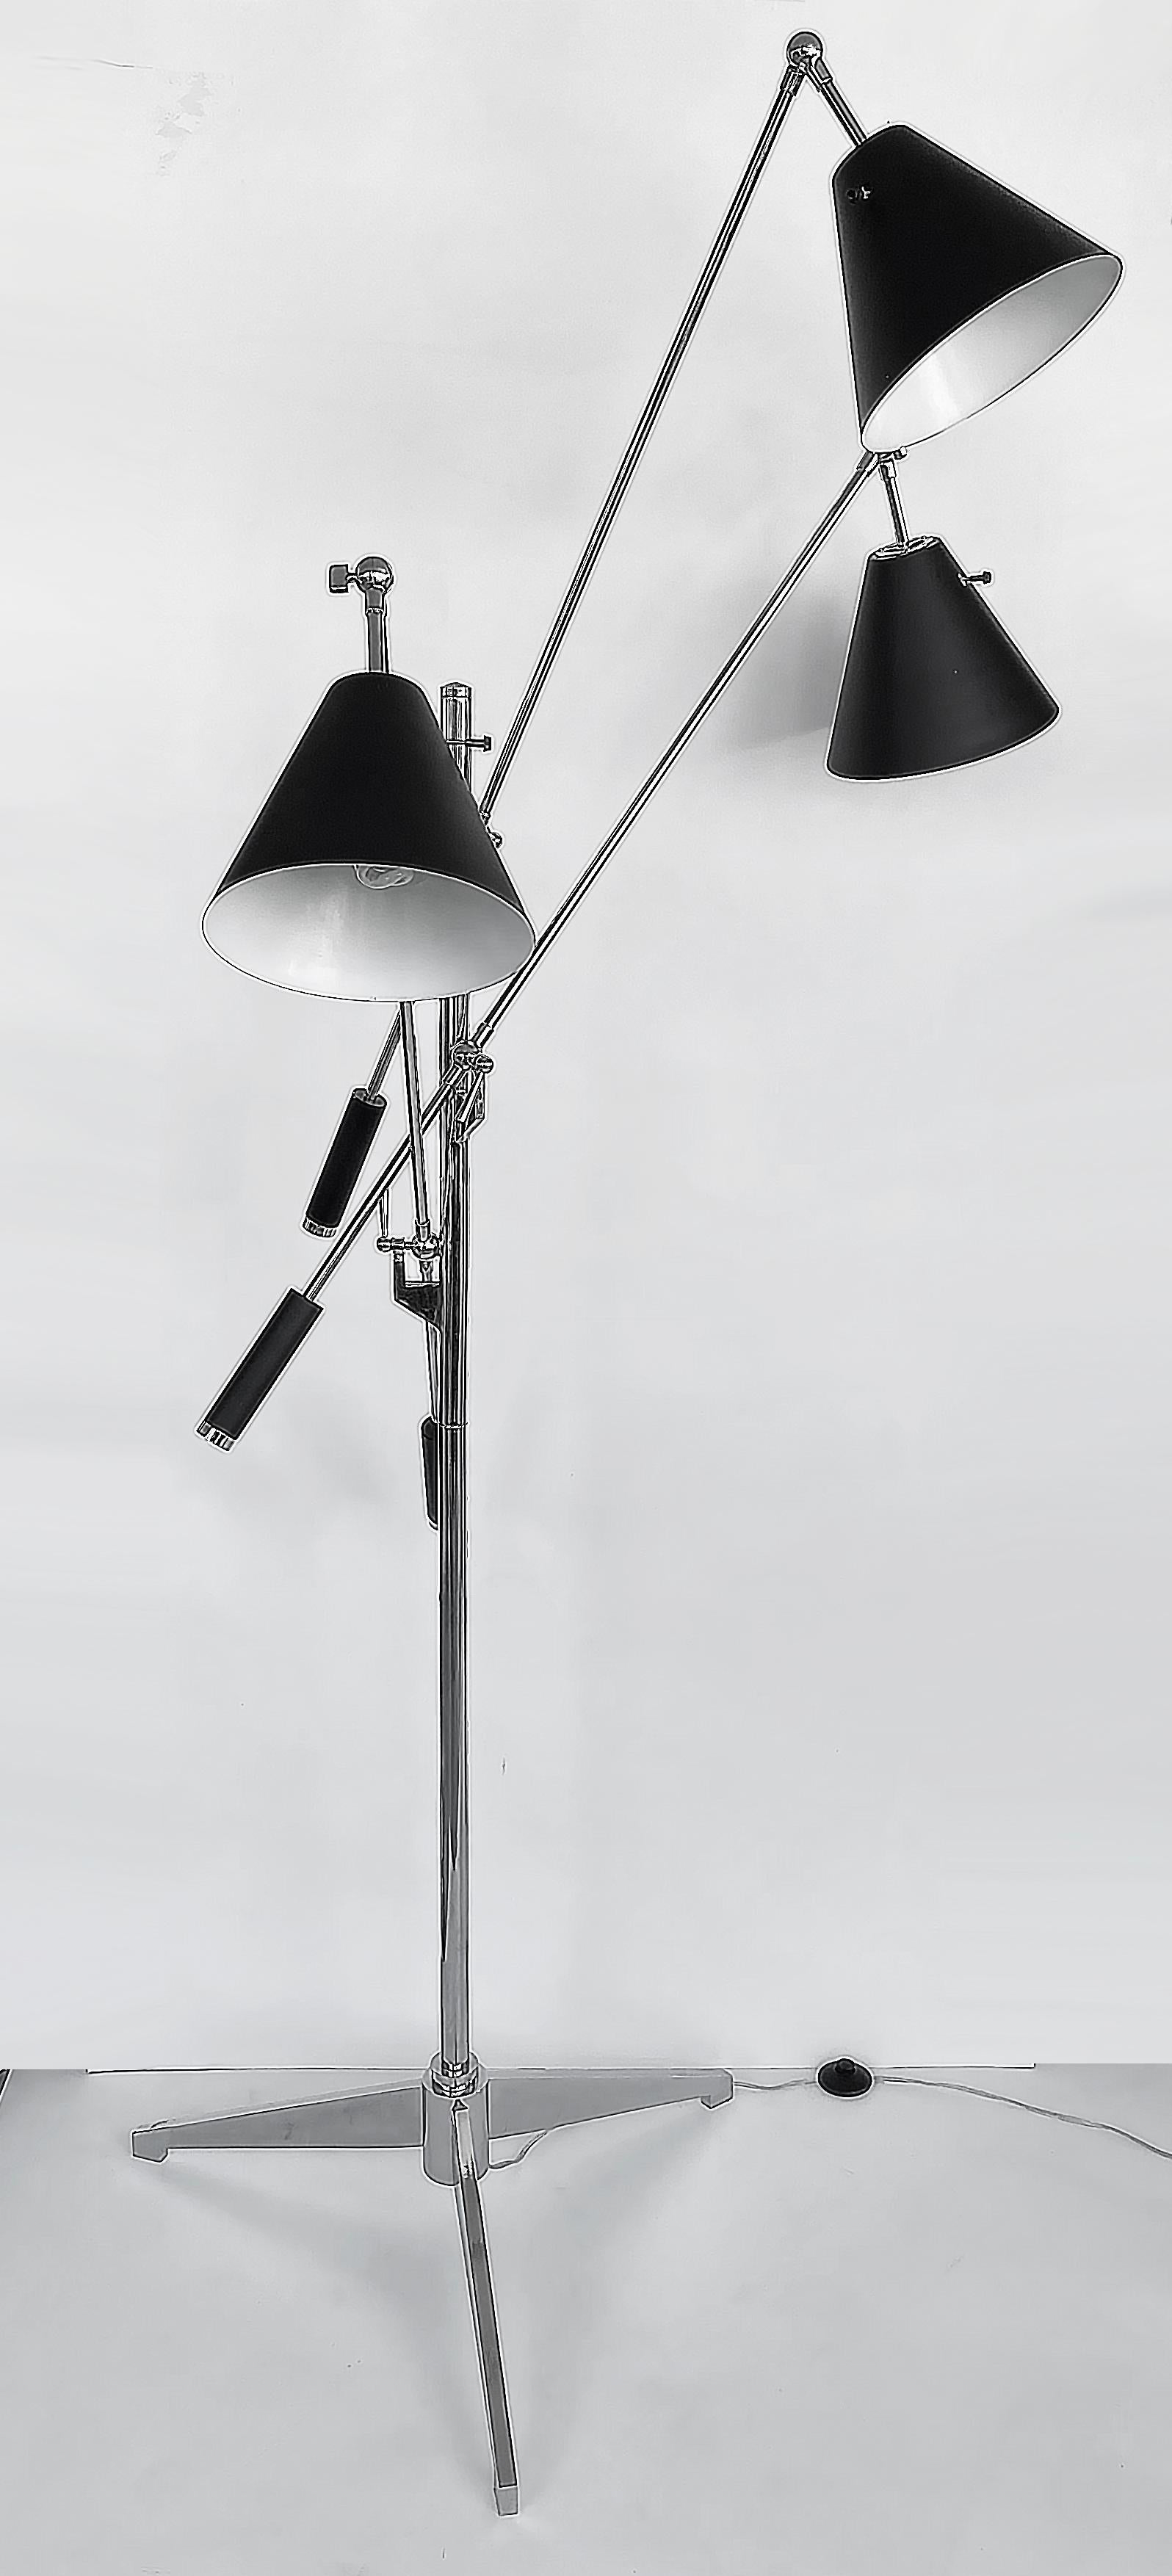 Triennale floor lamp by Angelo Lelli for Arredoluce Italy

Offered for sale is the iconic Triennale floor lamp designed by Angelo Lelii and manufactured by Arredoluce Italy. This particular example is from the later 20th century and is made of